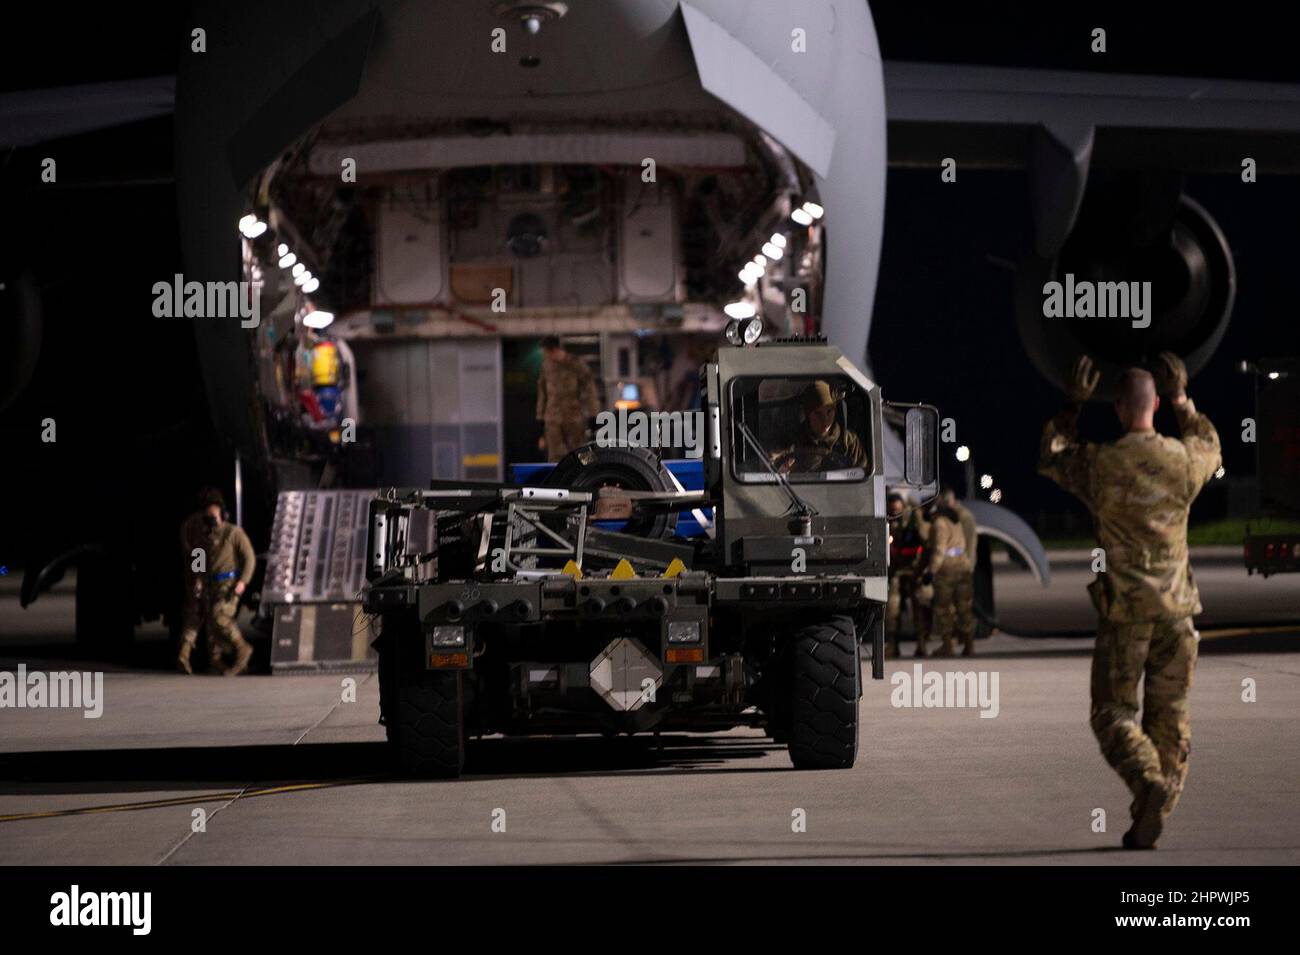 U.S. Air Force Airman 1st Class Chase Smith, right, 8th Airlift Squadron loadmaster, marshals a K-loader toward a C-17 Globemaster III, assigned to Joint Base Lewis-McChord, Washington, at Travis Air Force Base, California, Feb. 14, 2022. U.S. Airmen with the 60th Aerial Port Squadron and 8th Airlift Squadron load K-loaders onto the C-17. K-loaders are used to transport cargo into and out of aircraft. Under the direction of U.S. Transportation Command, the 60th Air Mobility Wing supported the 621st Contingency Response Wing during the movement of security assistance cargo to Ukraine via commer Stock Photo